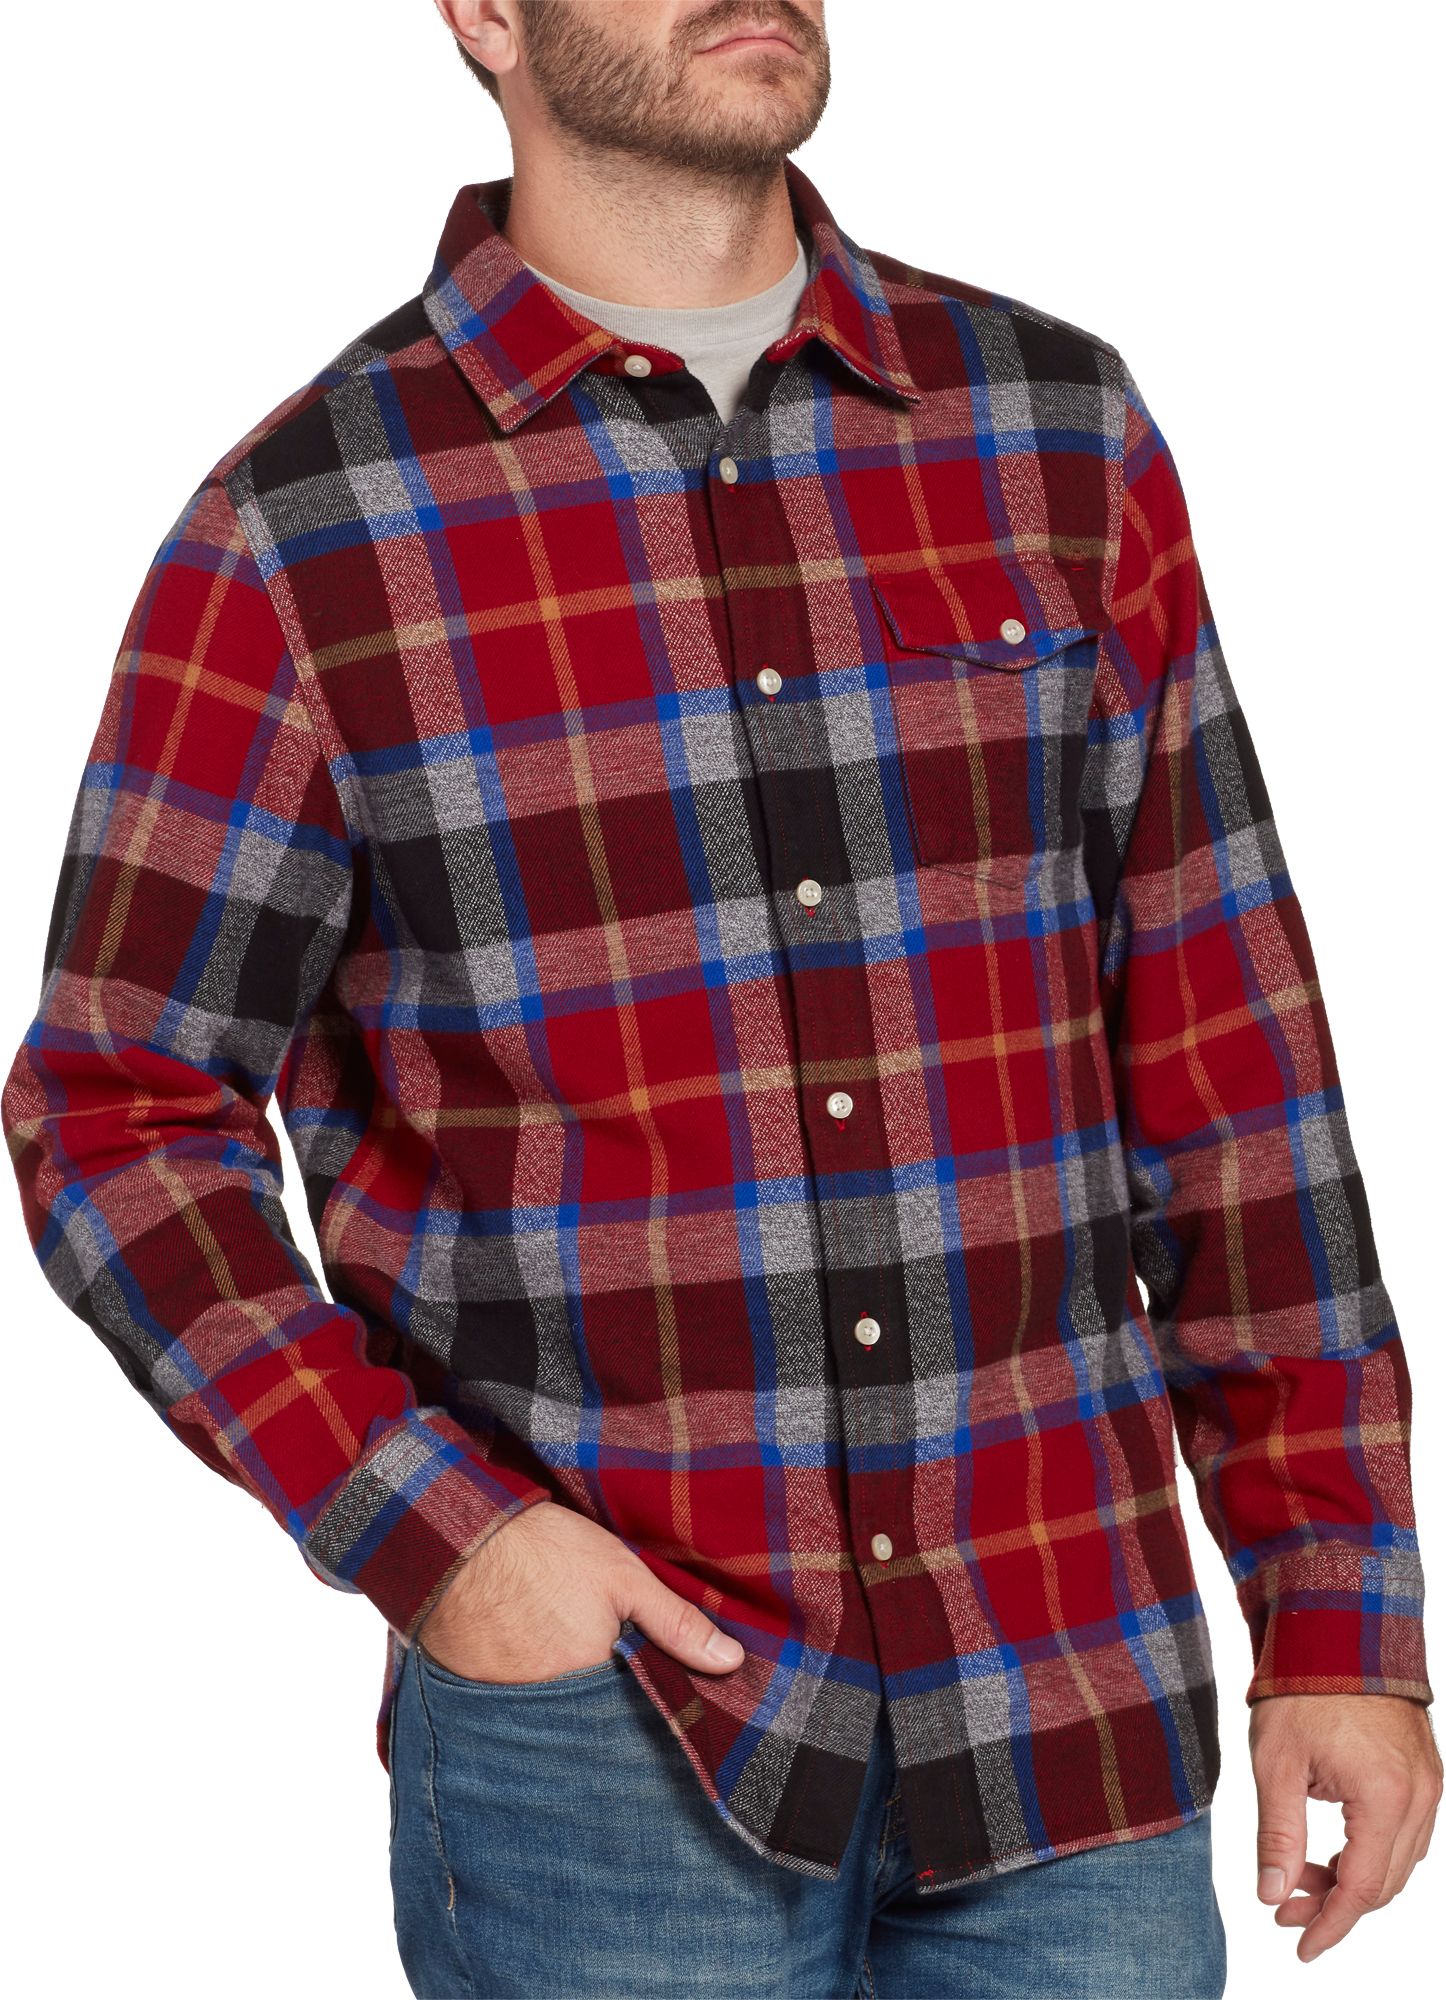 north face flannel shirt